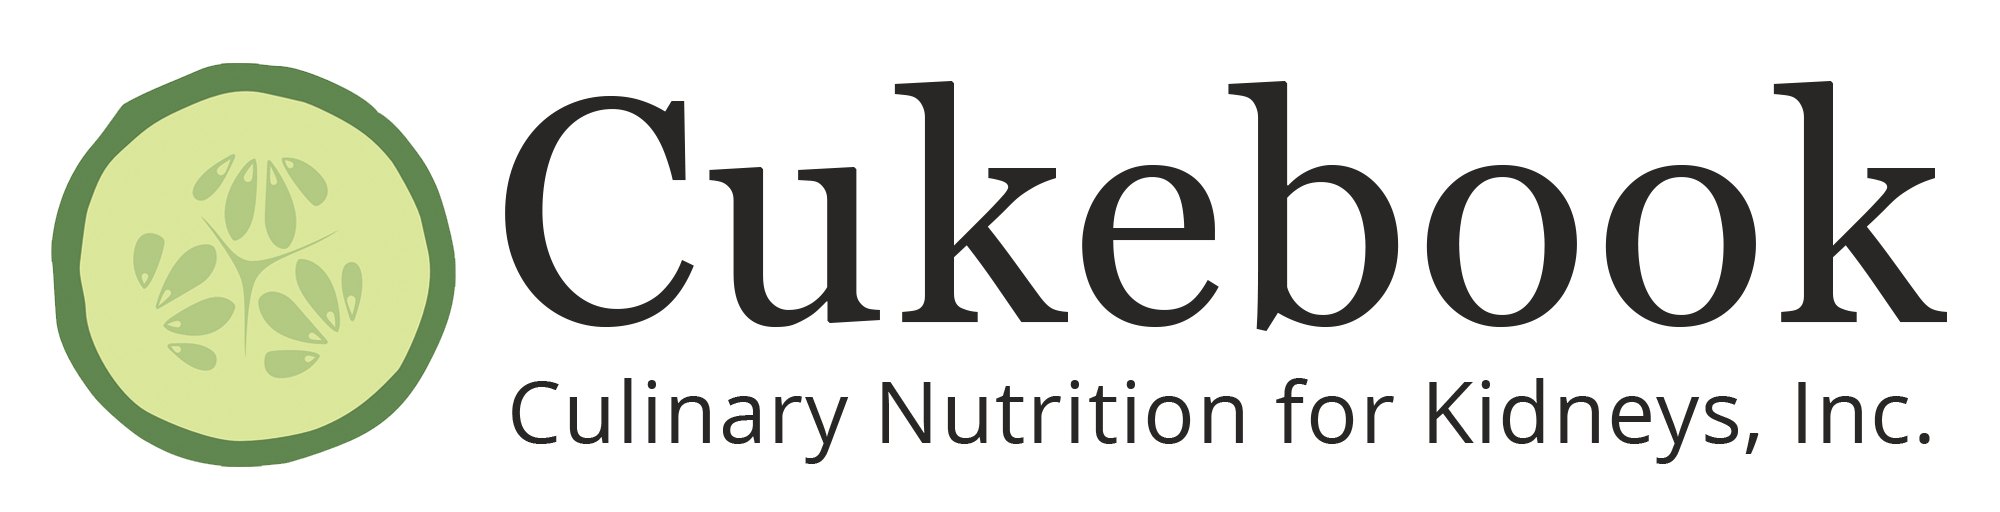 Cukebook (Culinary Nutrition For Kidneys, Inc.)